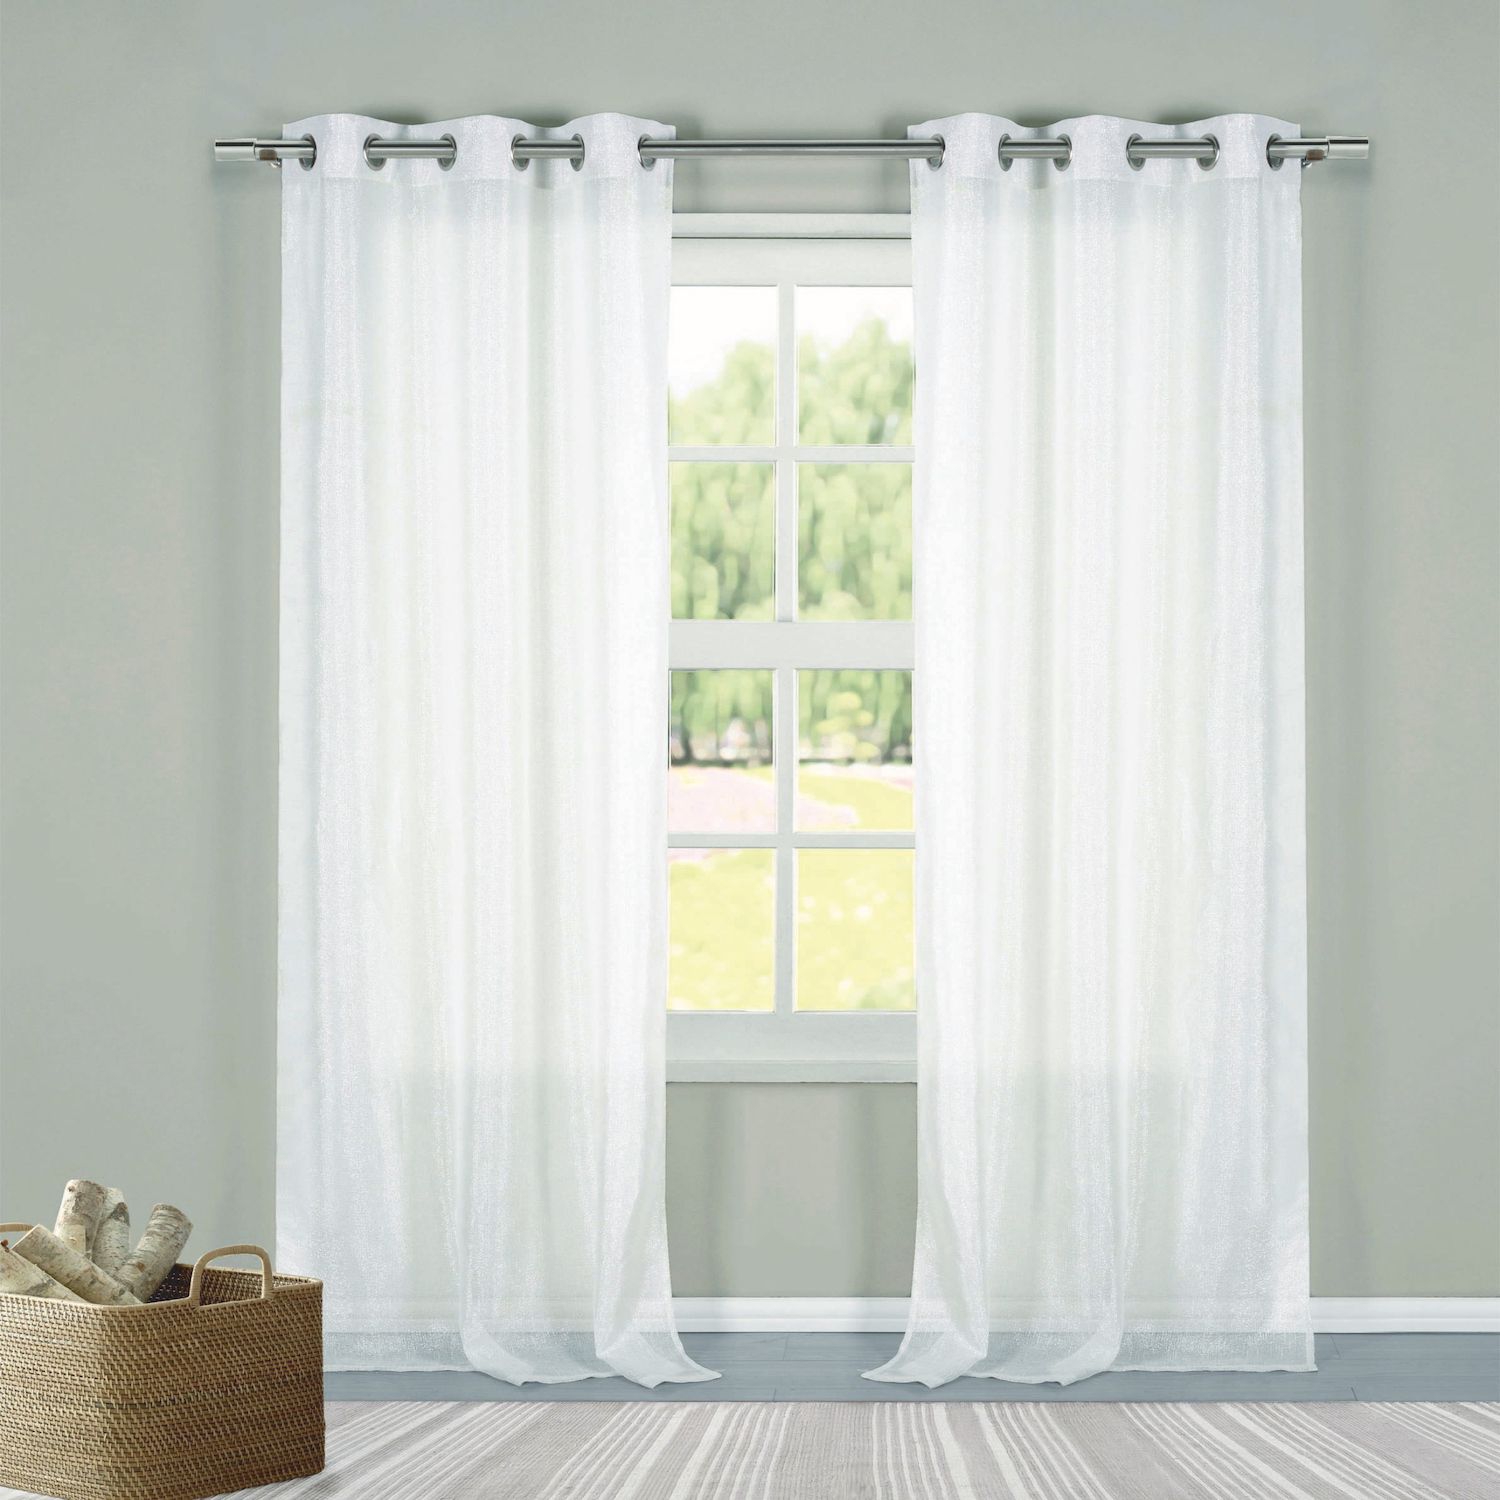 Image for Duck River Textile Metallico Metallic 2-pack Window Curtain Set at Kohl's.